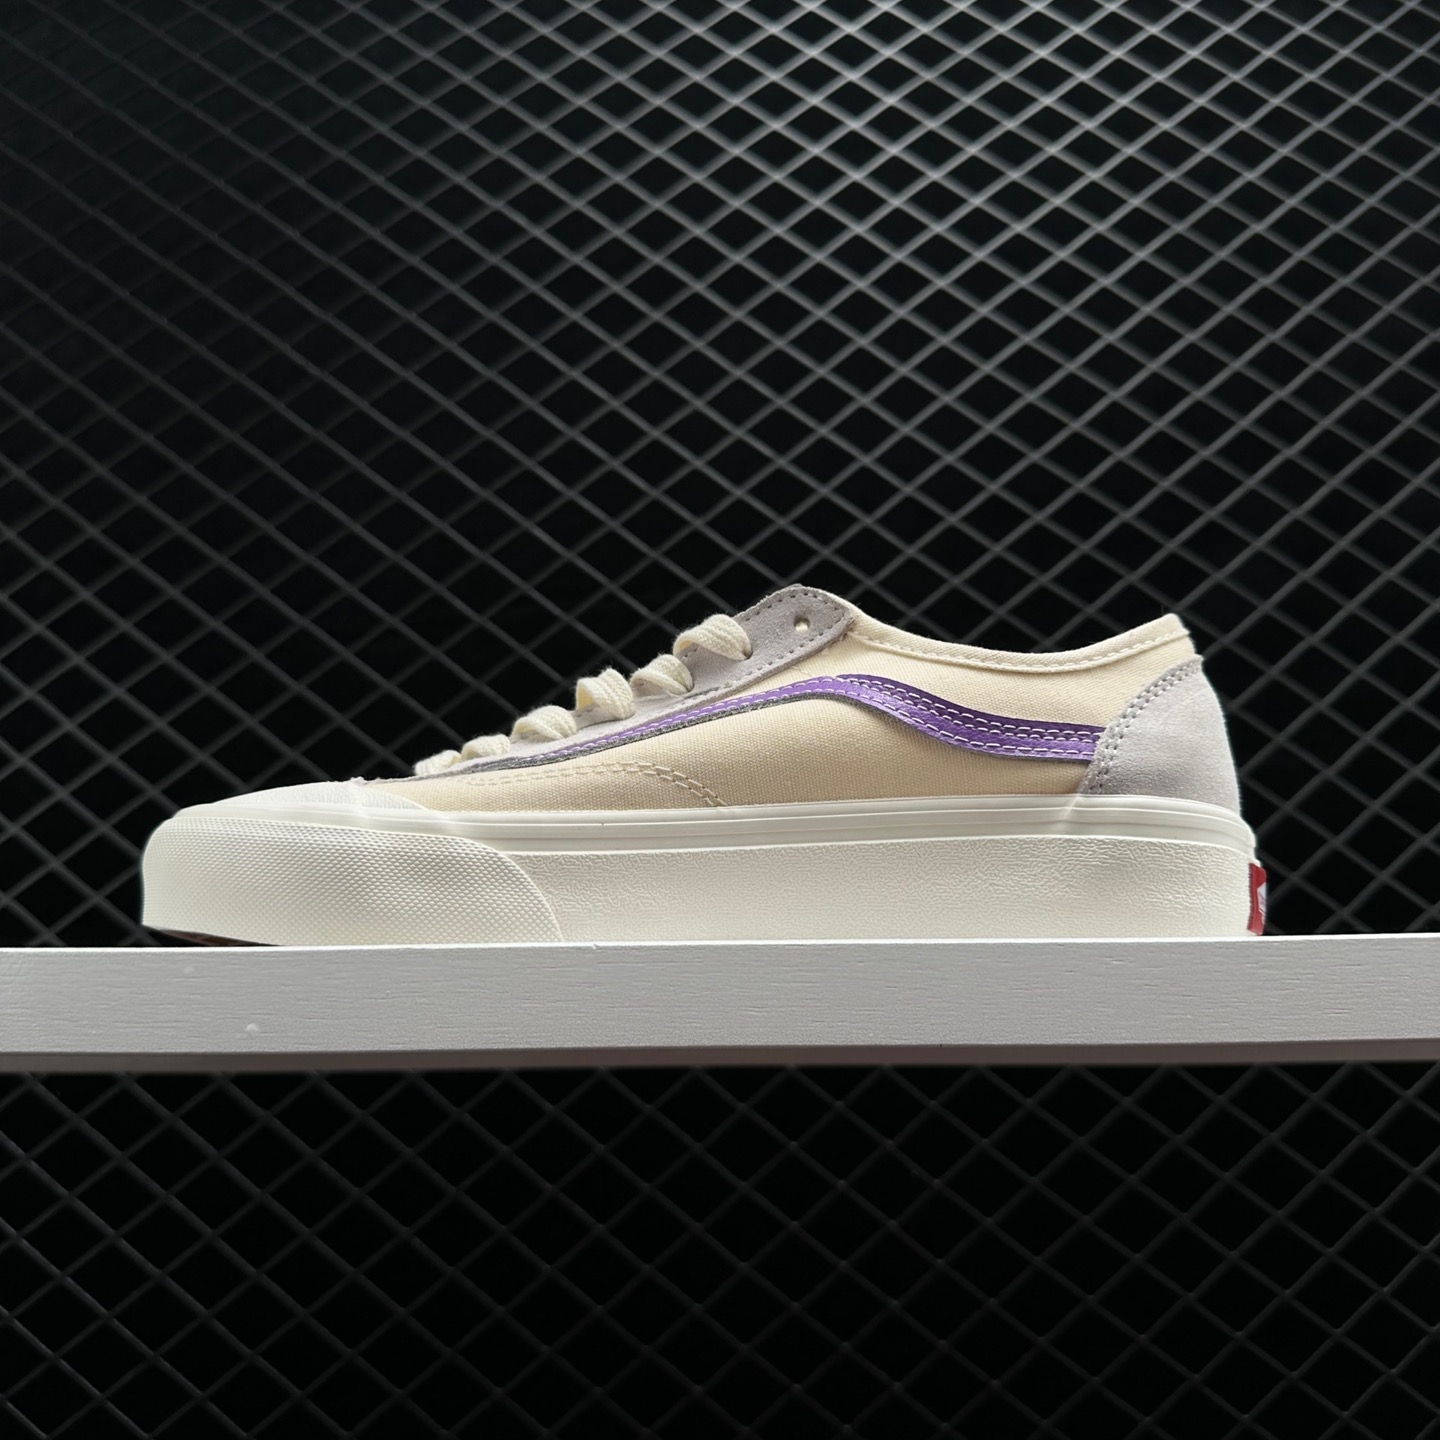 Vans Style 36 Decon SF 'White Purple' VN0A5HFF2Z2 - Retro-inspired Sneakers in White and Purple